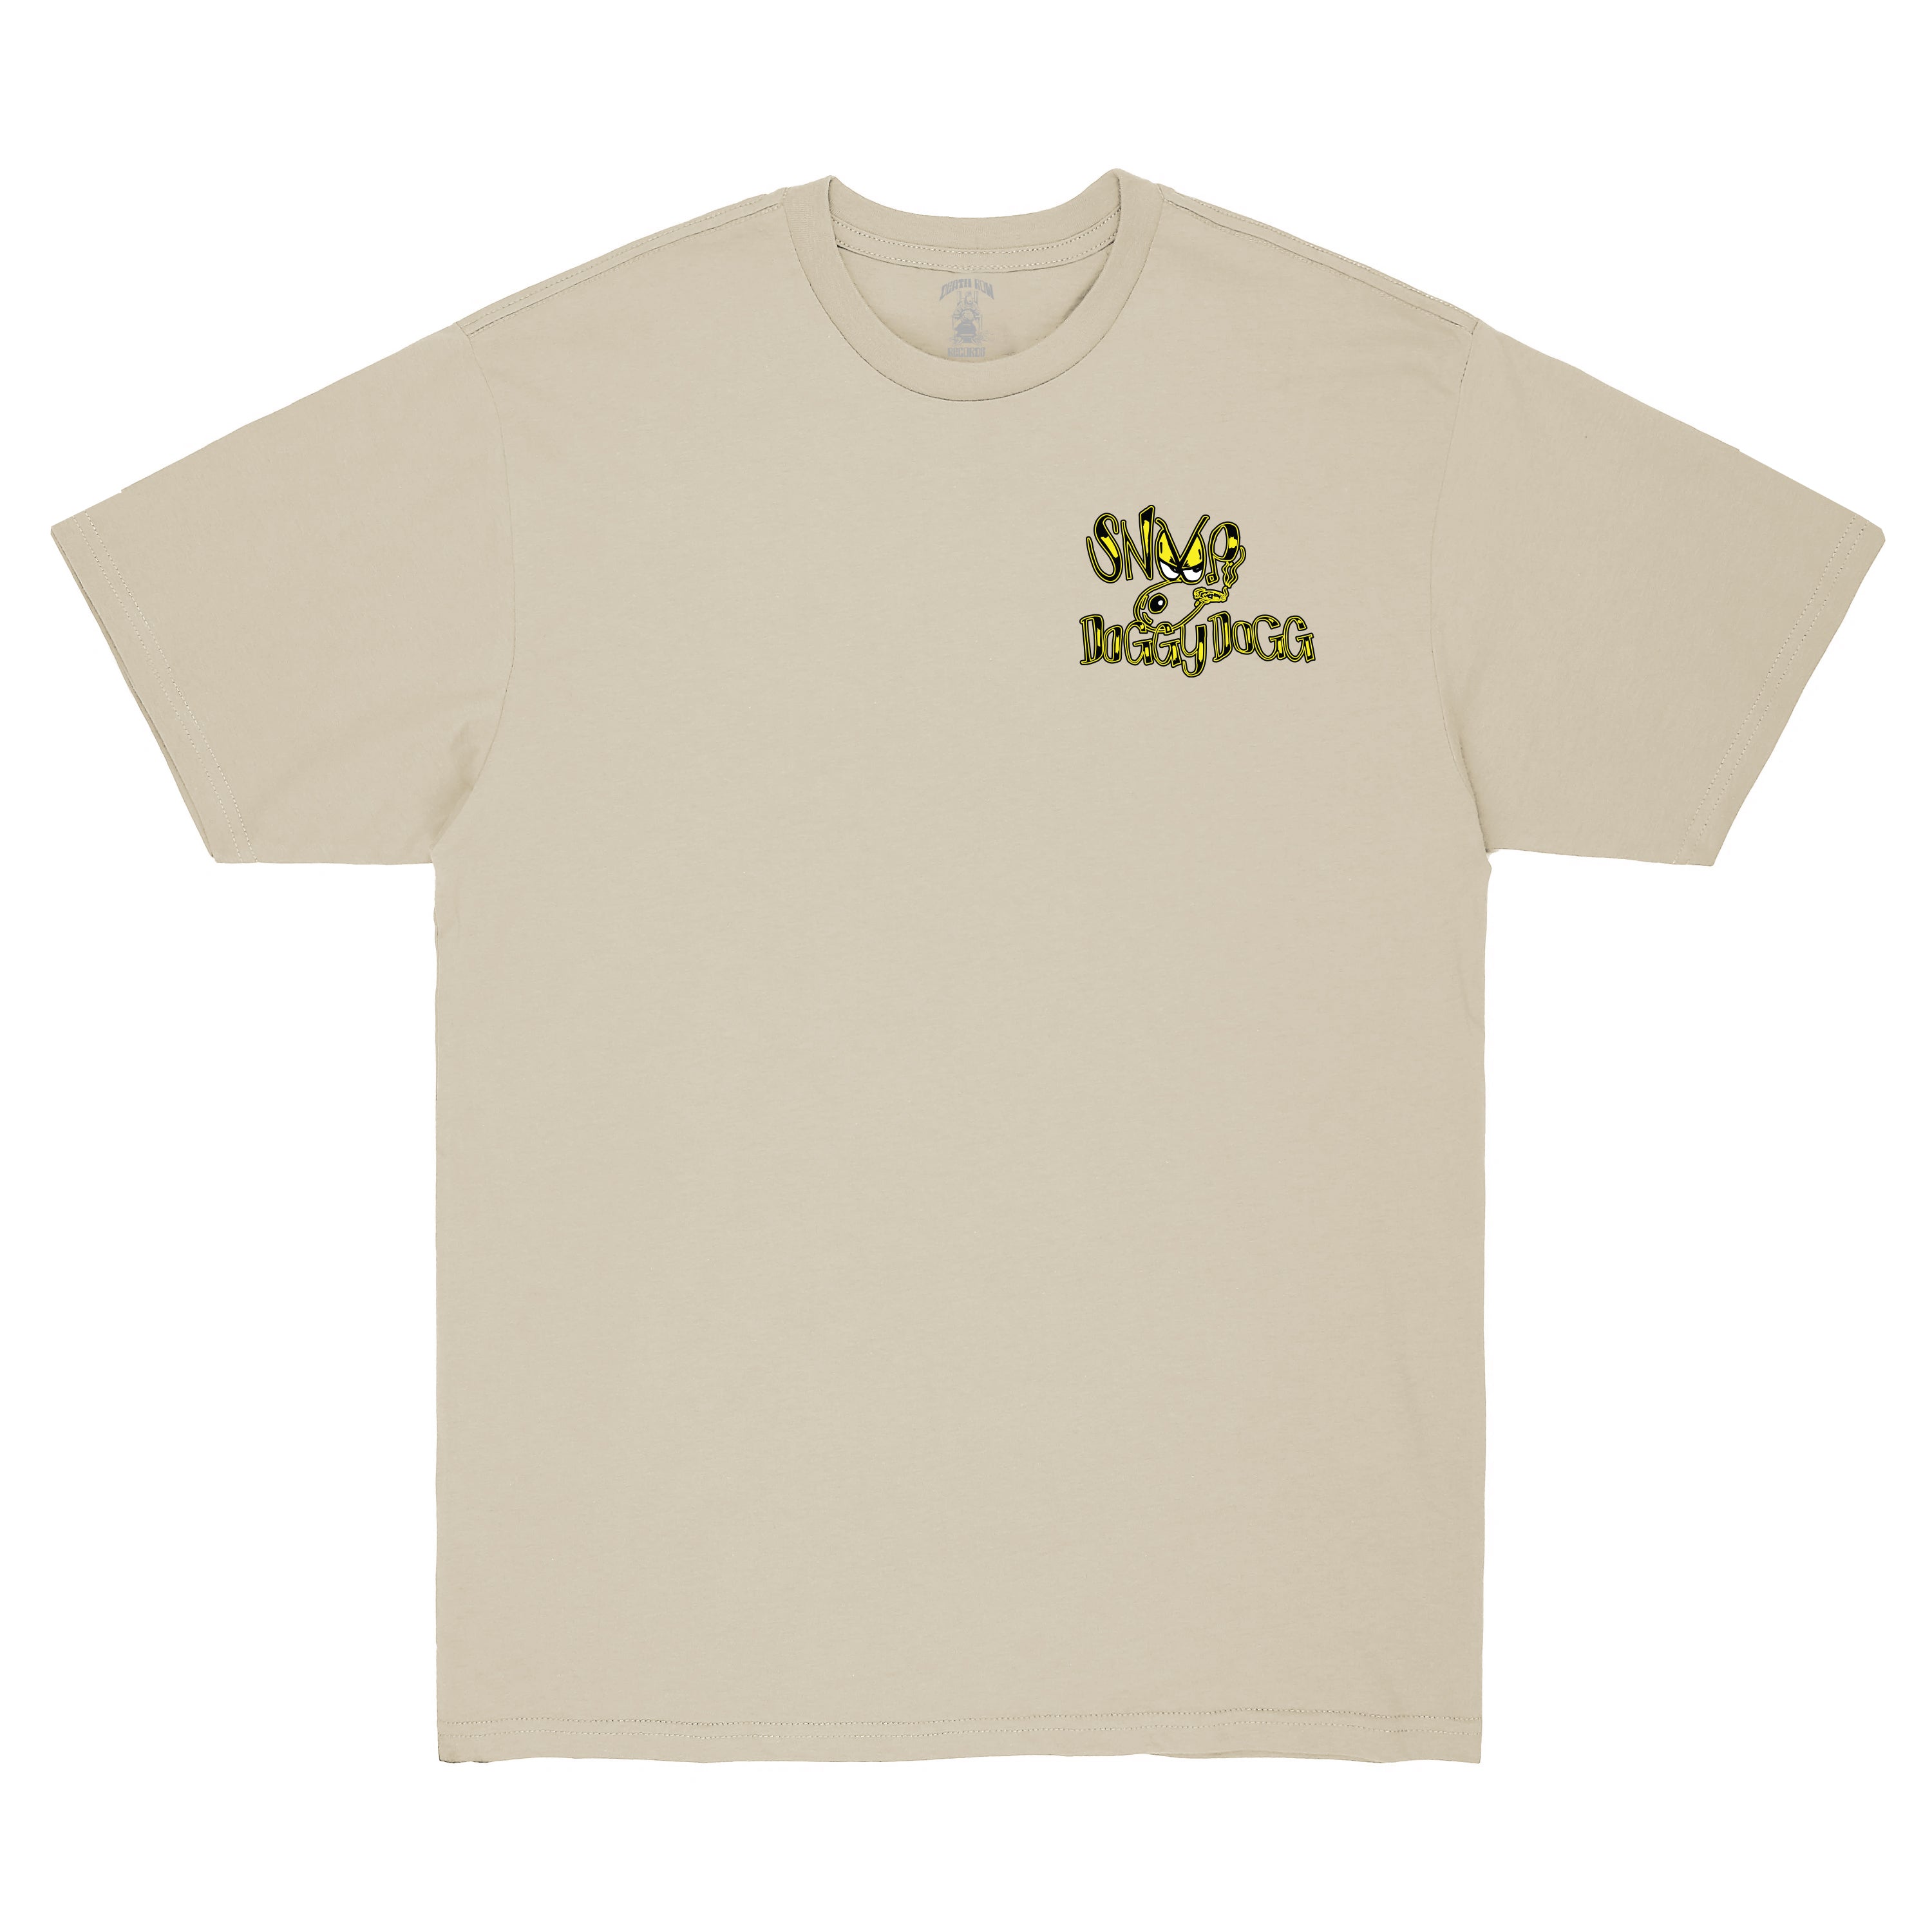 Doggystyle 30 Year Album Cover Tee